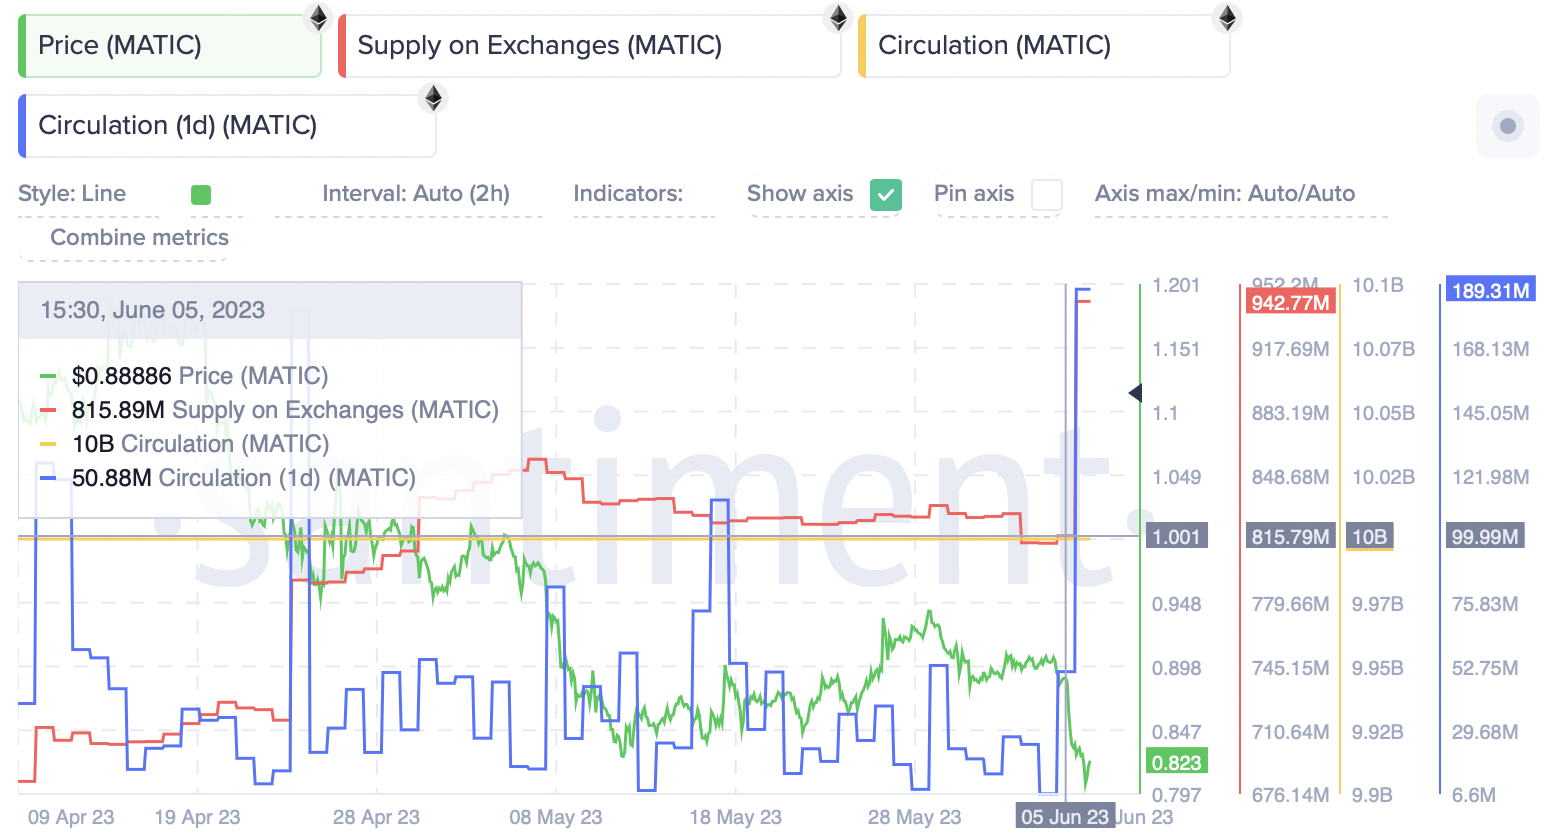 MATIC supply on exchanges